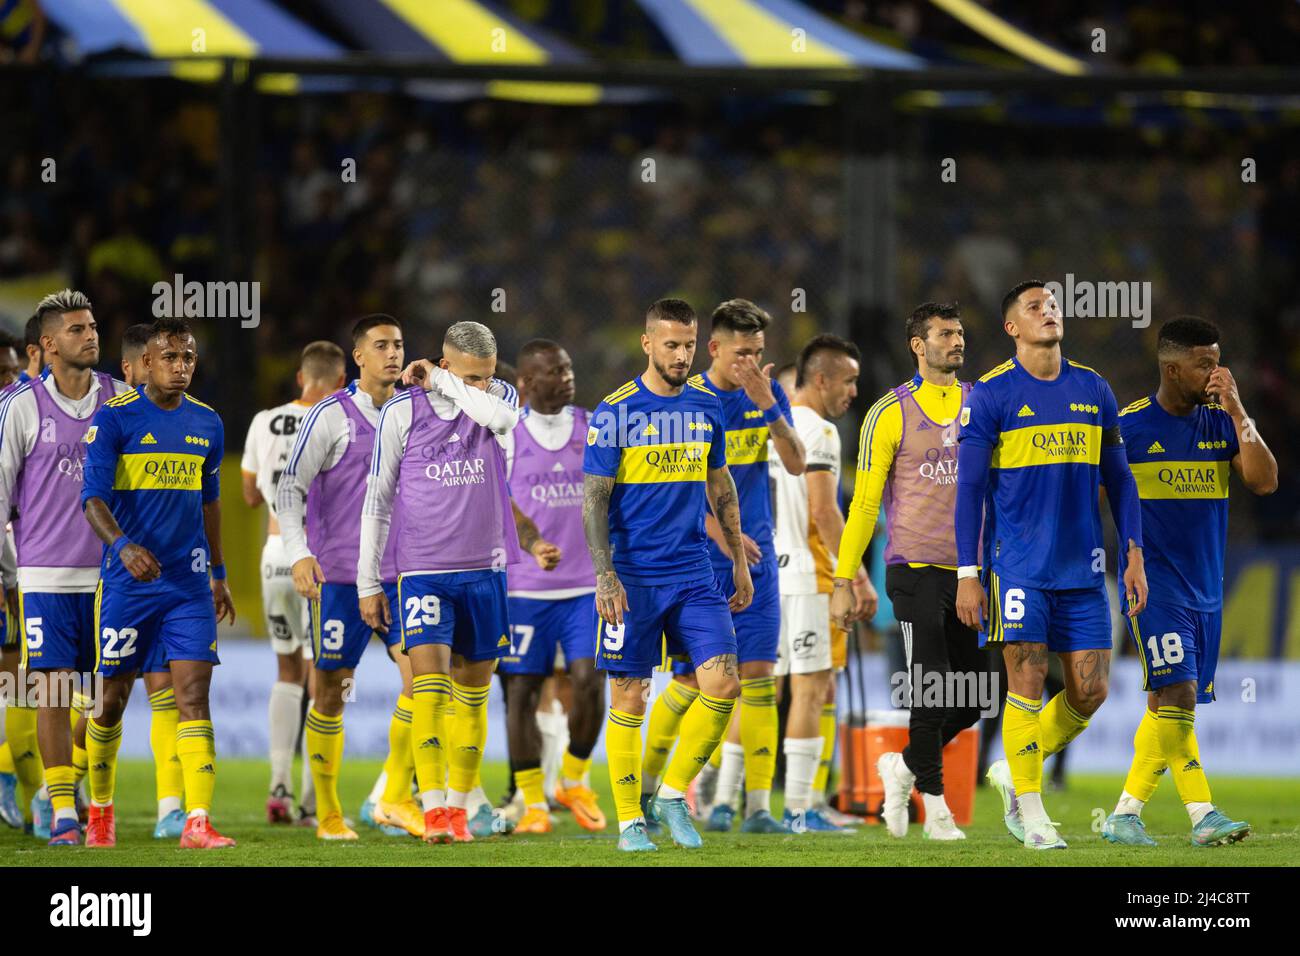 BUENOS AIRES, ARGENTINA - APRIL 3: Players of Boca Juniors after the final whistle of the match between Boca Juniors and Arsenal FC as part of Copa de Stock Photo